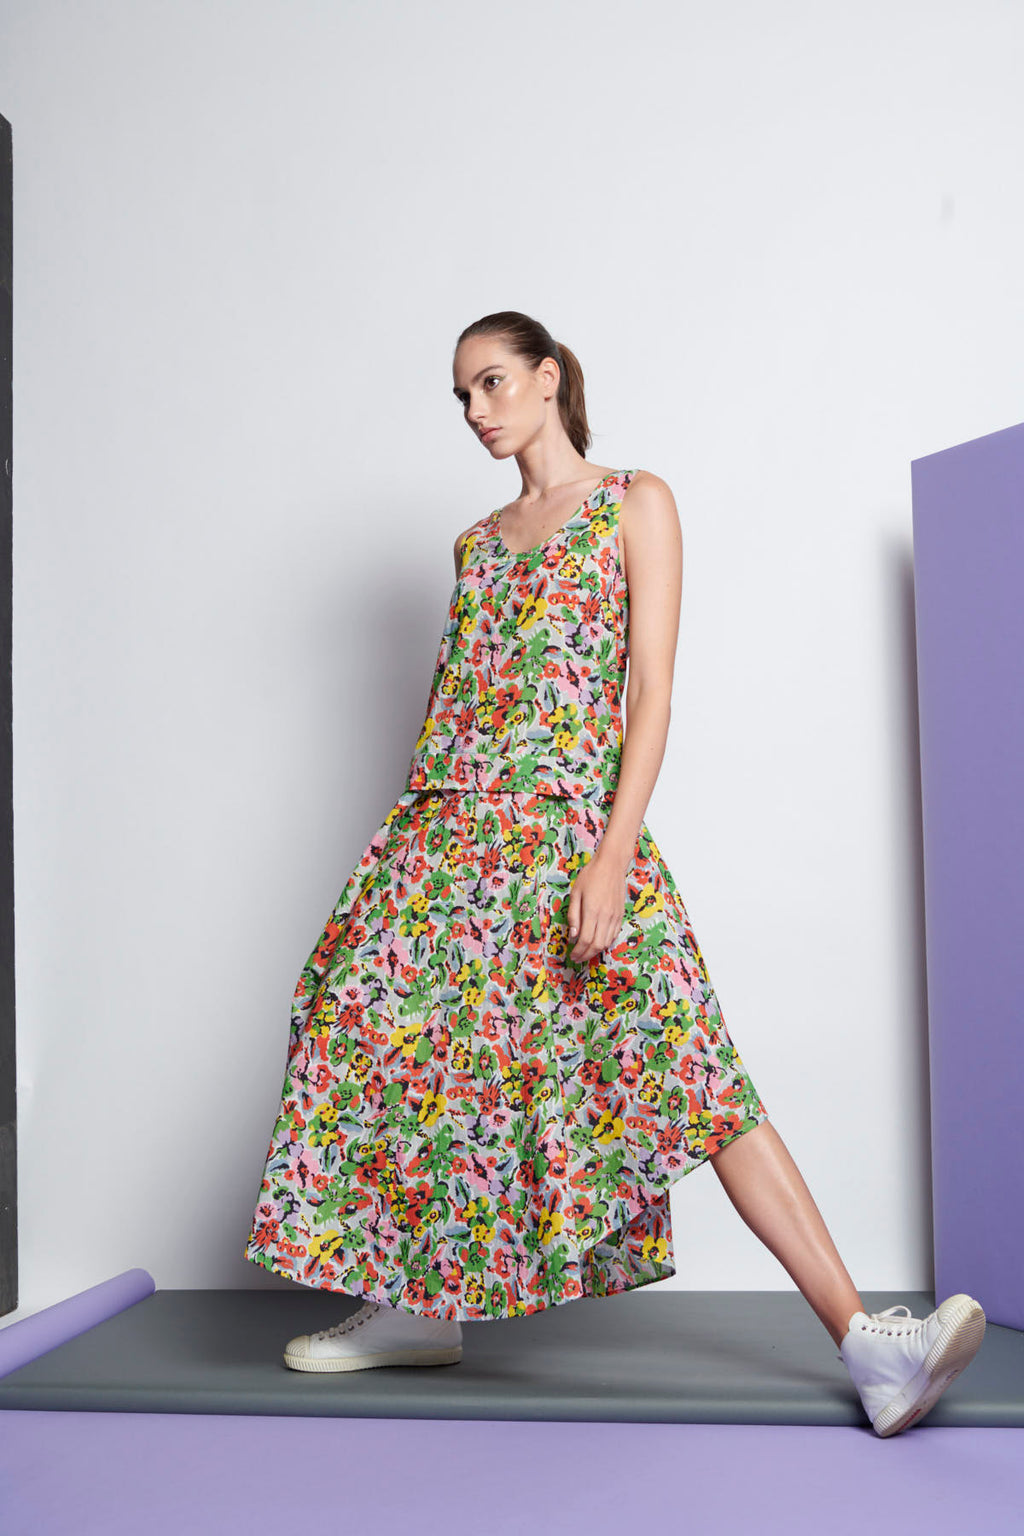 A floral, sleeveless dress that has a round neckline, dropped waist and cascading hem towards the middle